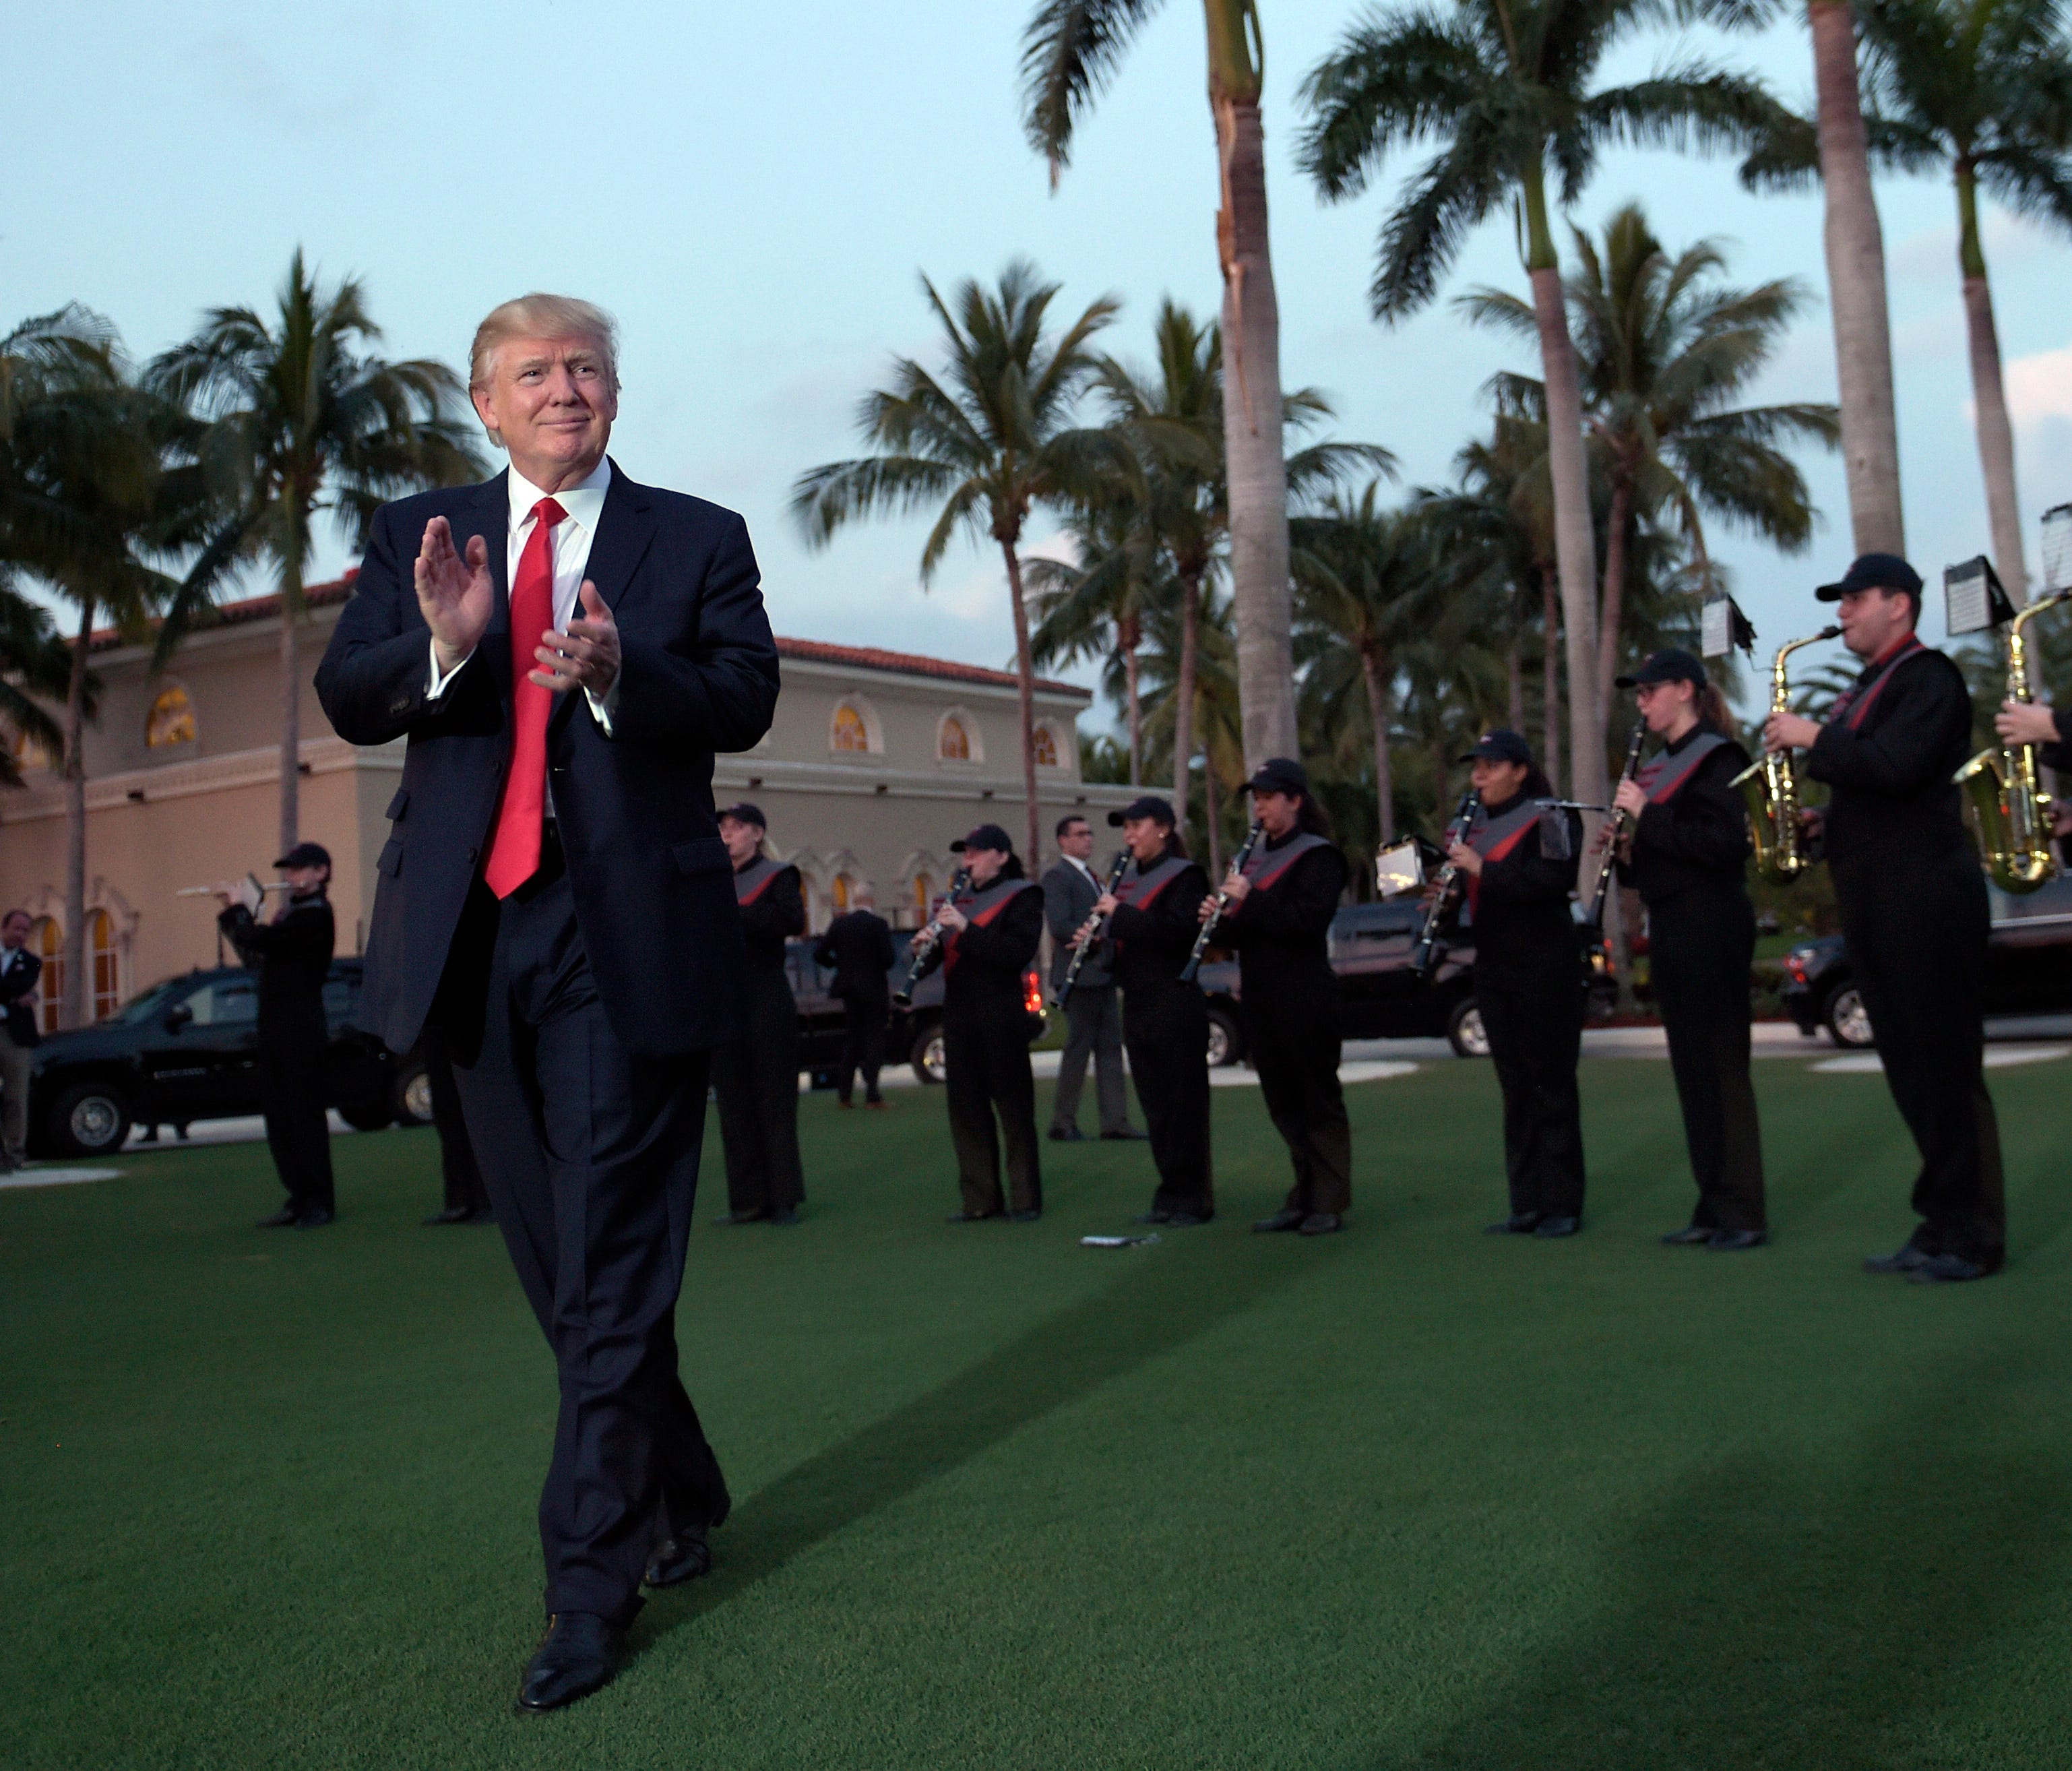 President Trump listens to the Palm Beach Central High School Band as they play at his arrival at Trump International Golf Club in West Palm Beach, Fla., on Feb. 5, 2017. The Trumps will be watching the Super Bowl.   Trump visited Trump International 